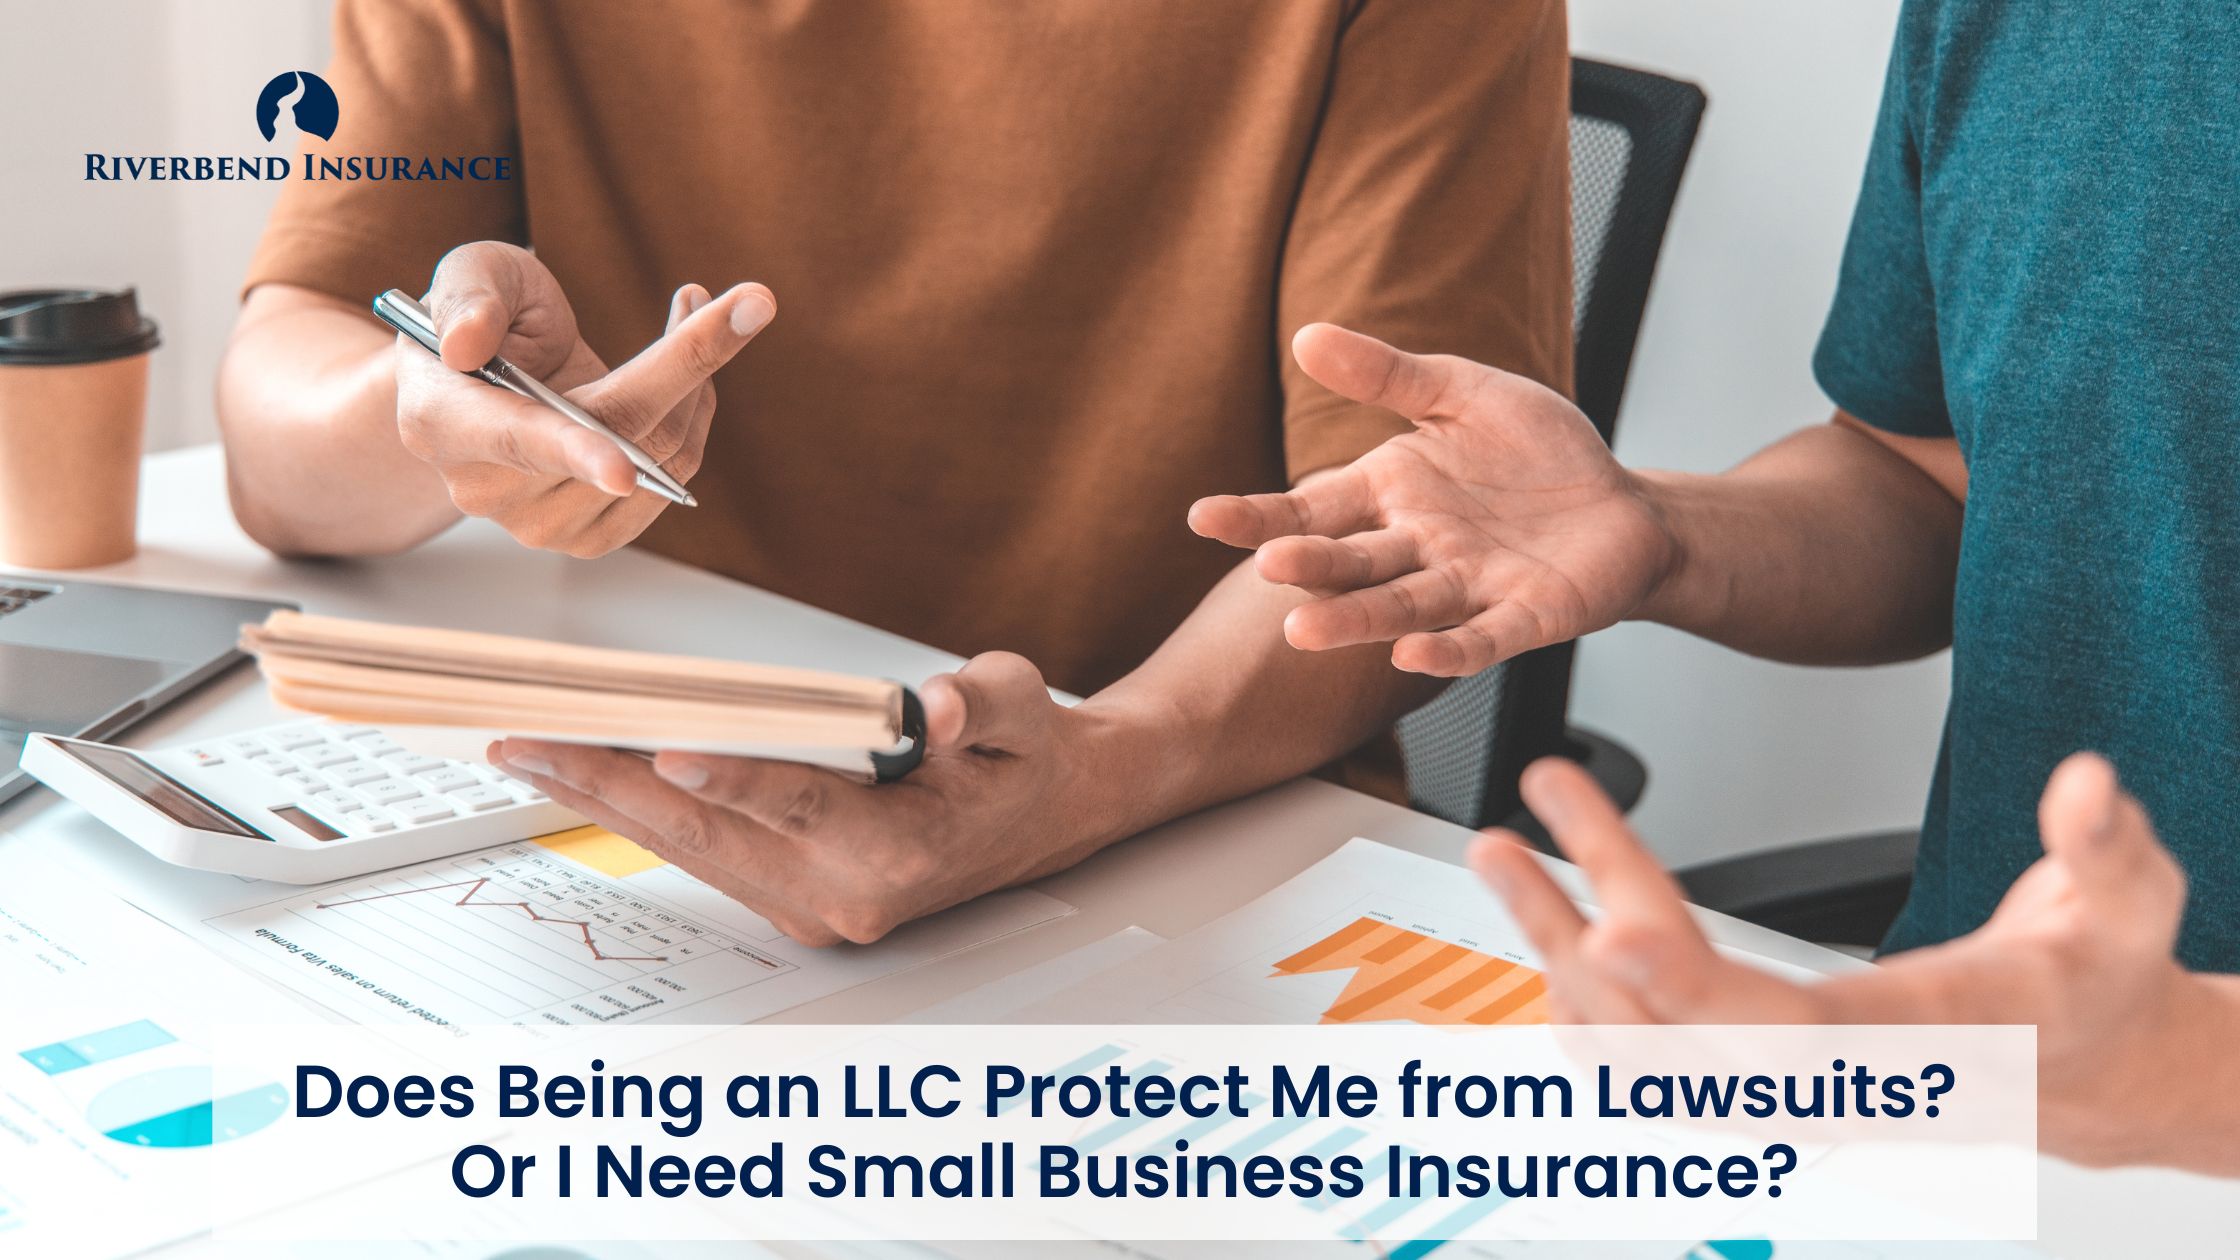 Does Being an LLC Protect Me from Lawsuits? Or I Need Small Business Insurance